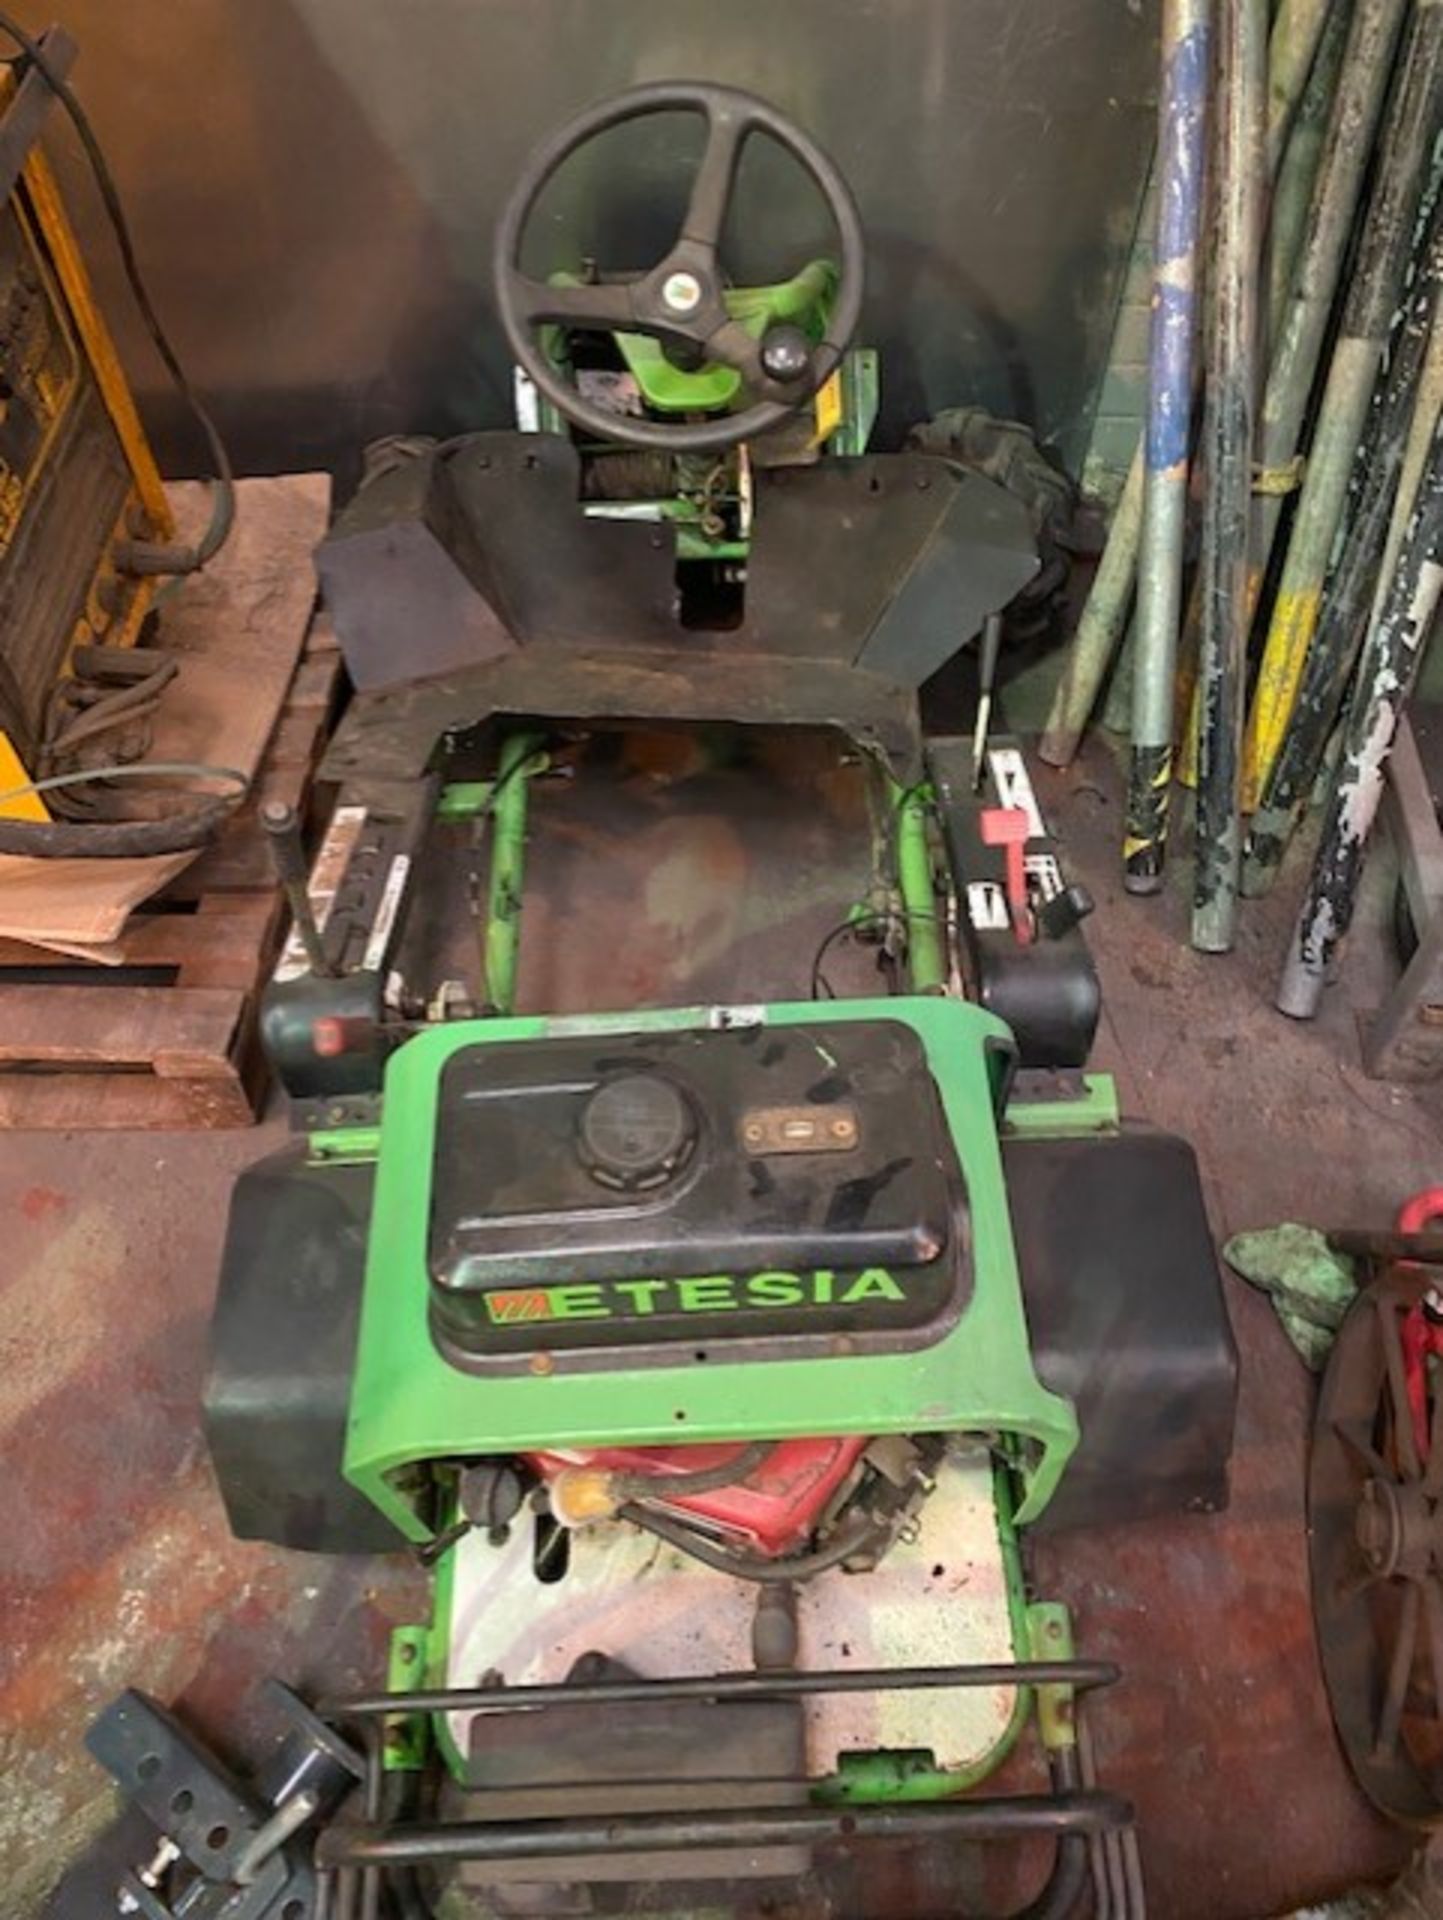 Etesia 85 with no gearbox or back axle